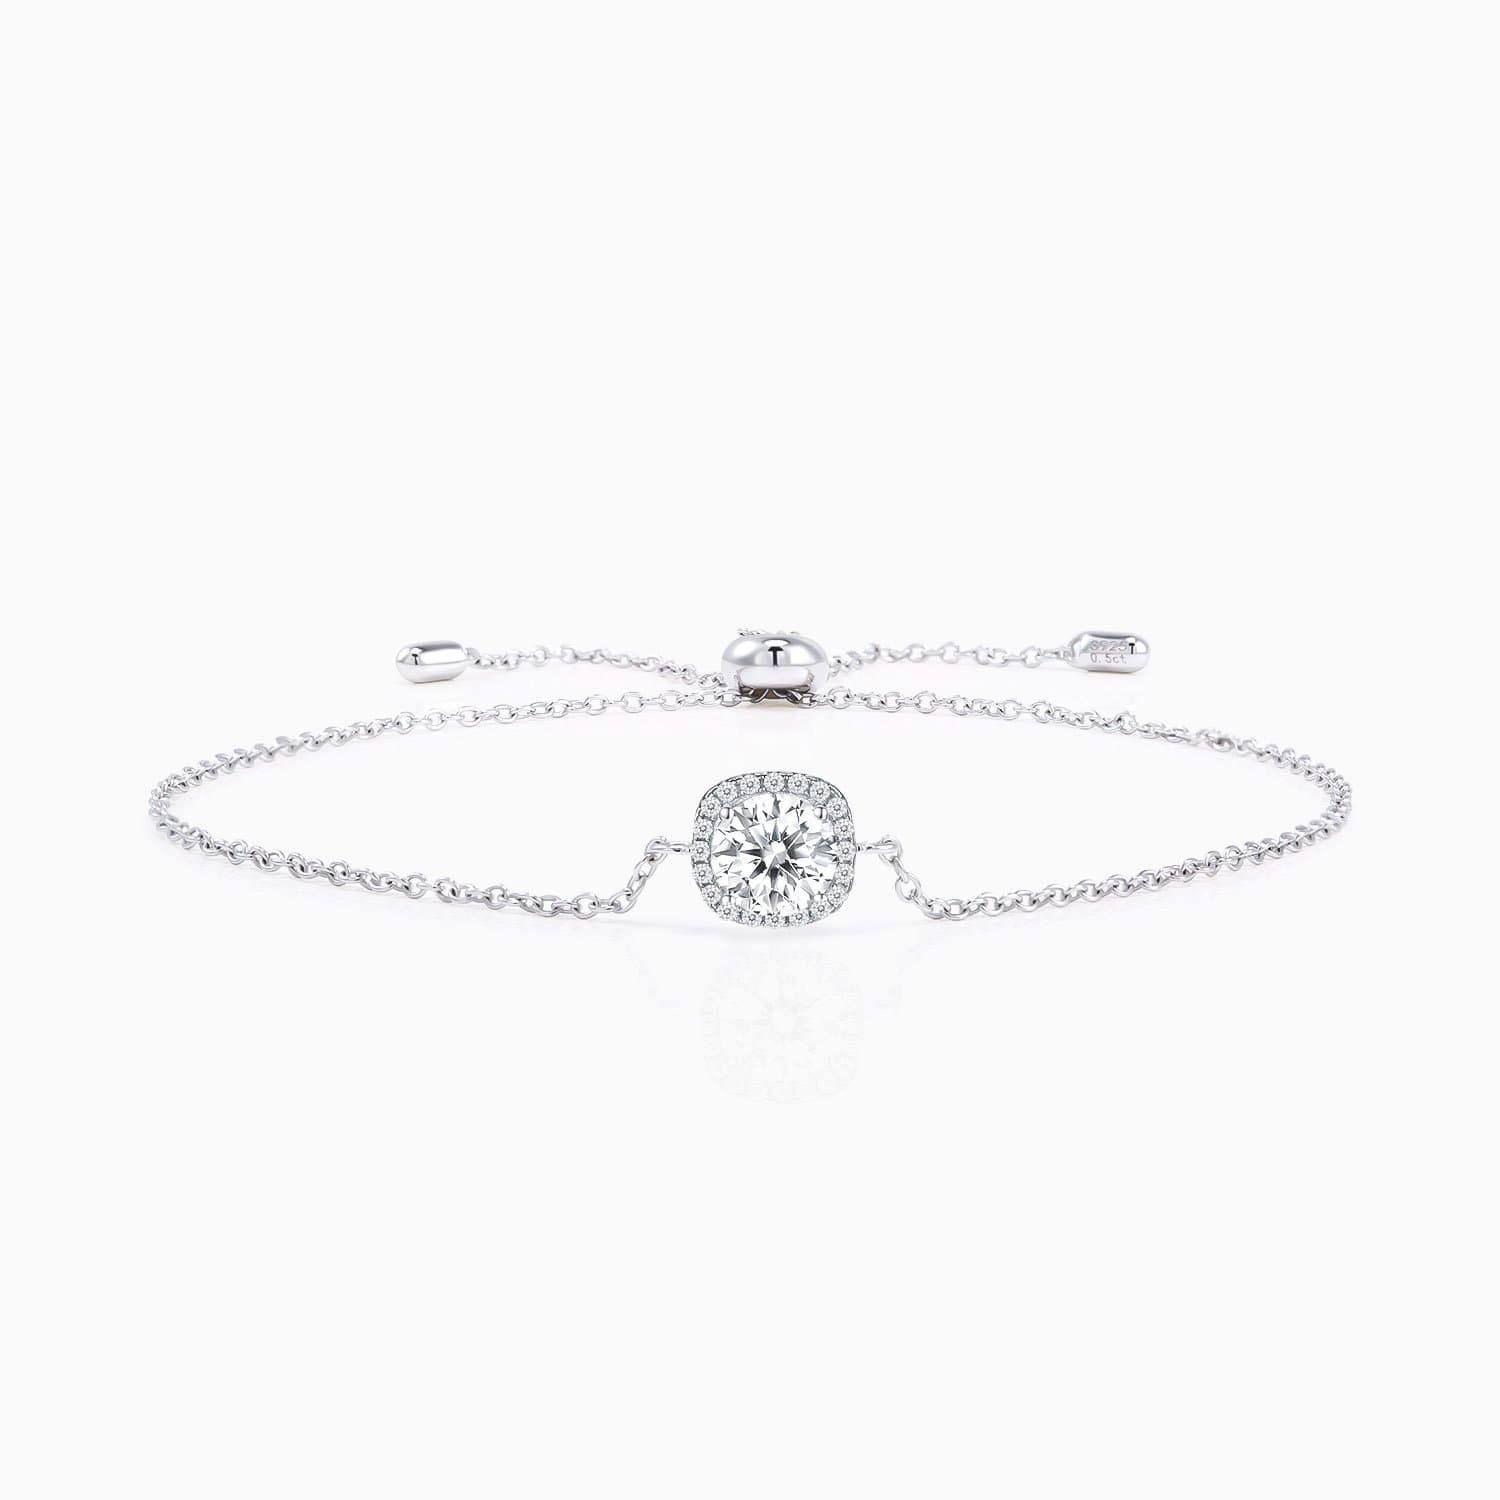 Moissanite Bracelet With Round Halo Solitaire Pendant Sterling Silver White Gold Plating 1 Carat